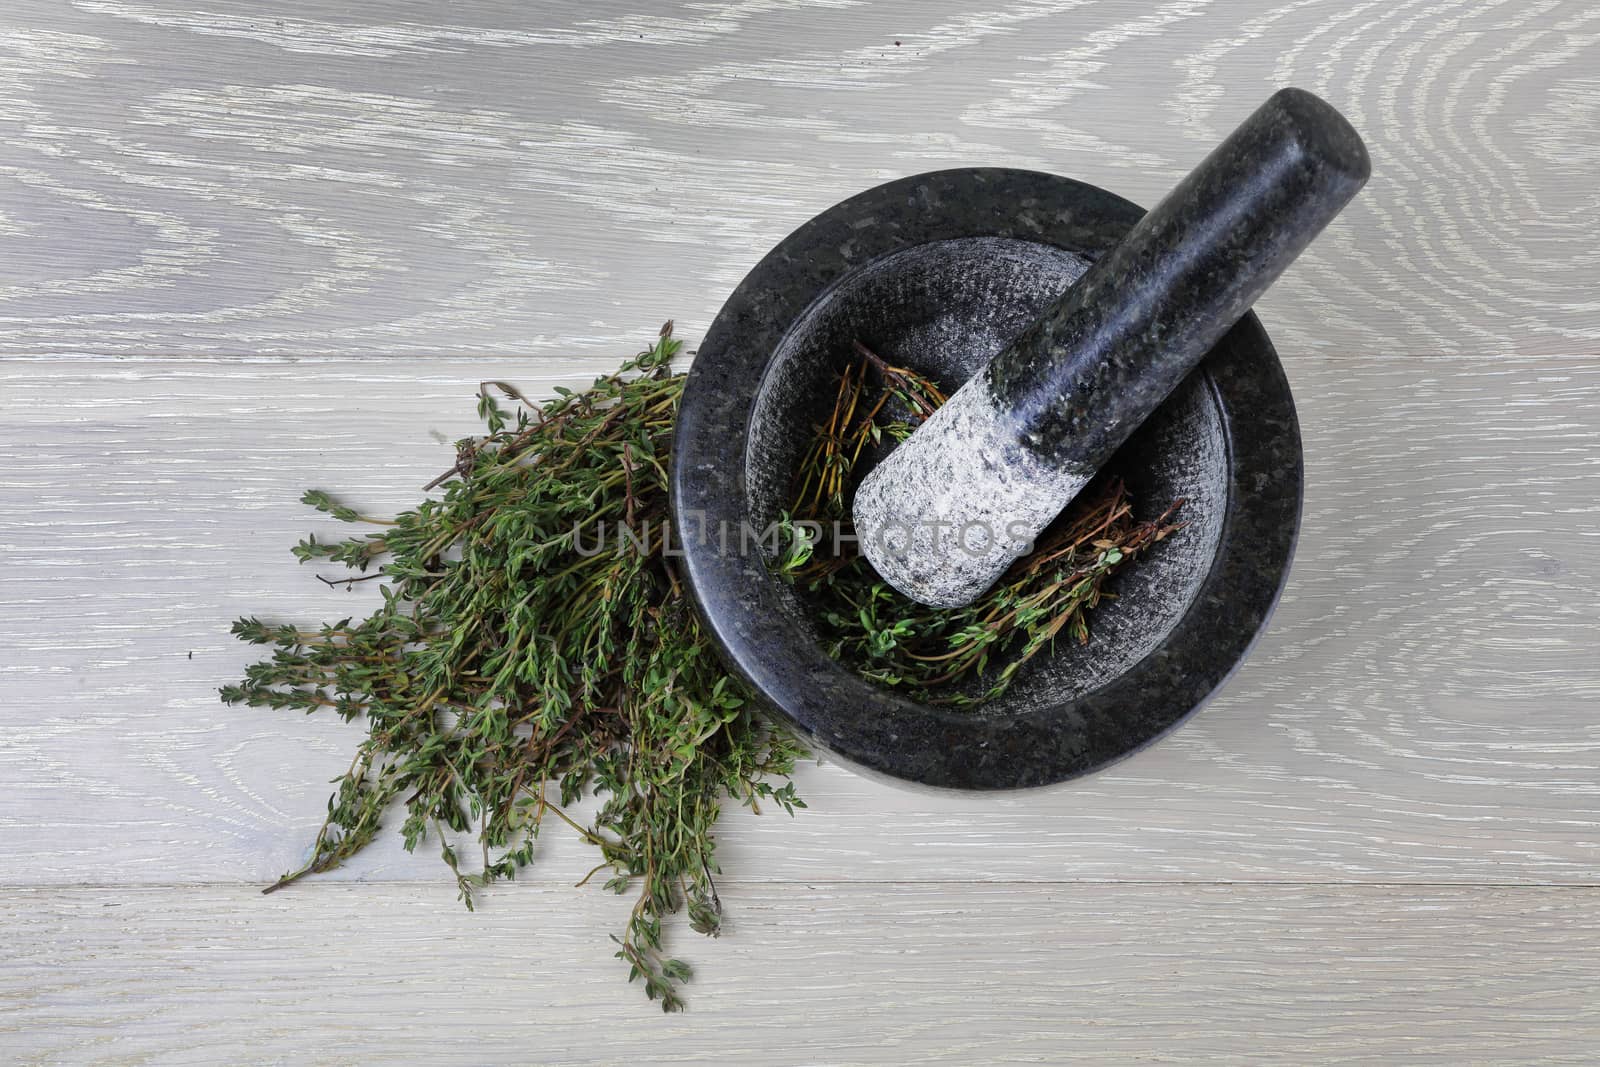 Top view of fresh thyme on wood surface and mortar and pestle